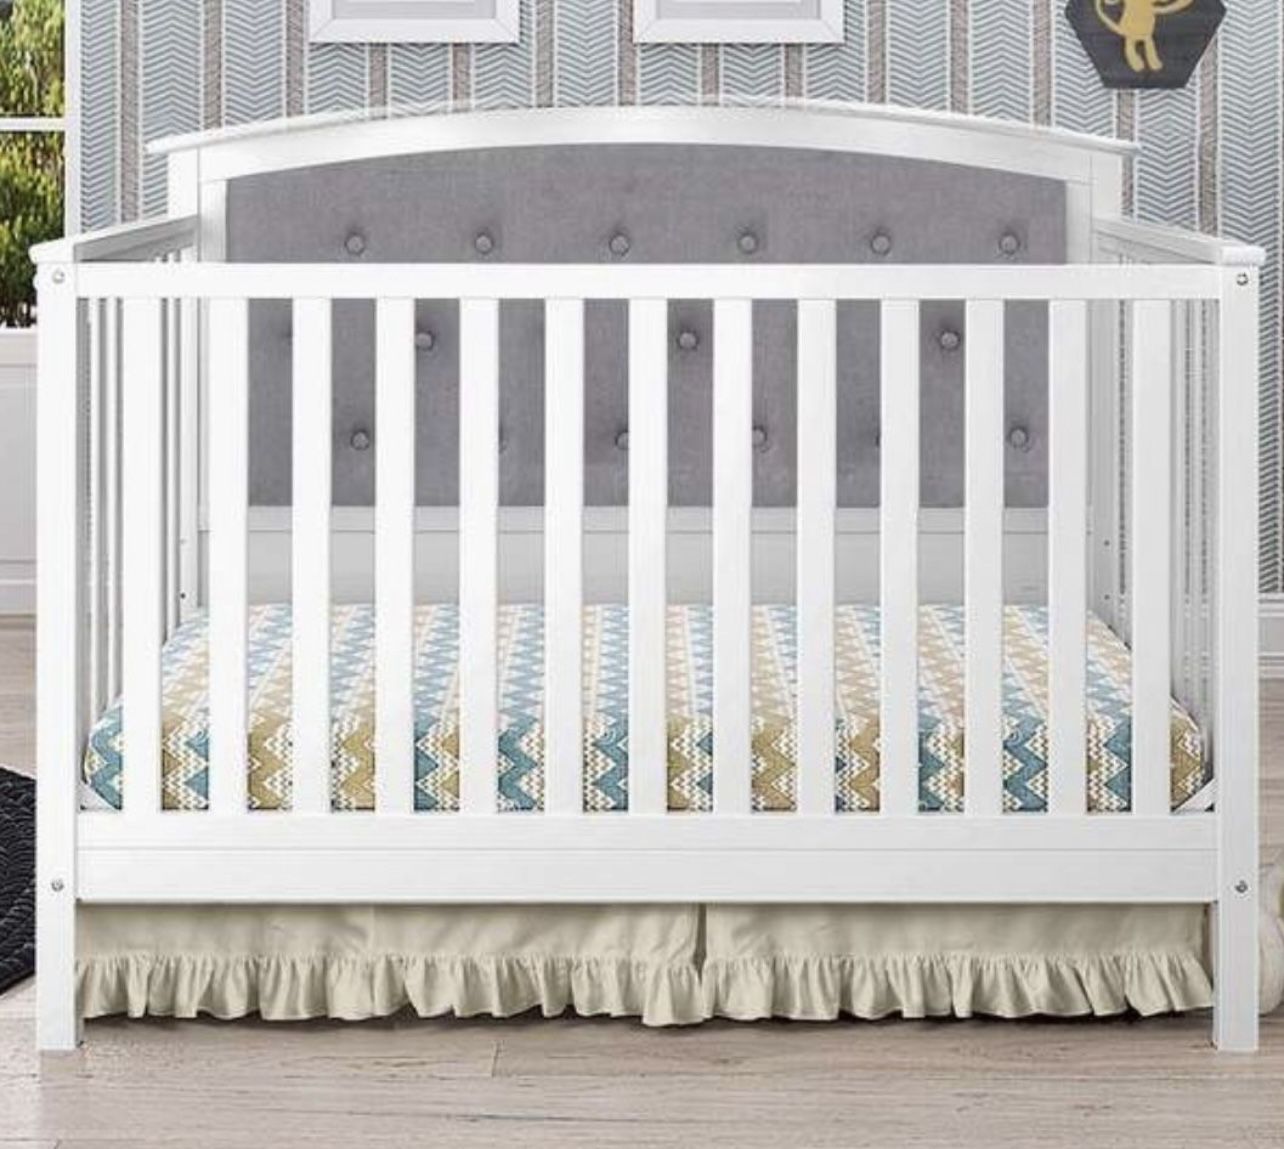 Esquina Tufted Crib By Harriet Bee + Sealy Baby Firm Rest 5.5” Waterproof Standard Crib And Trade